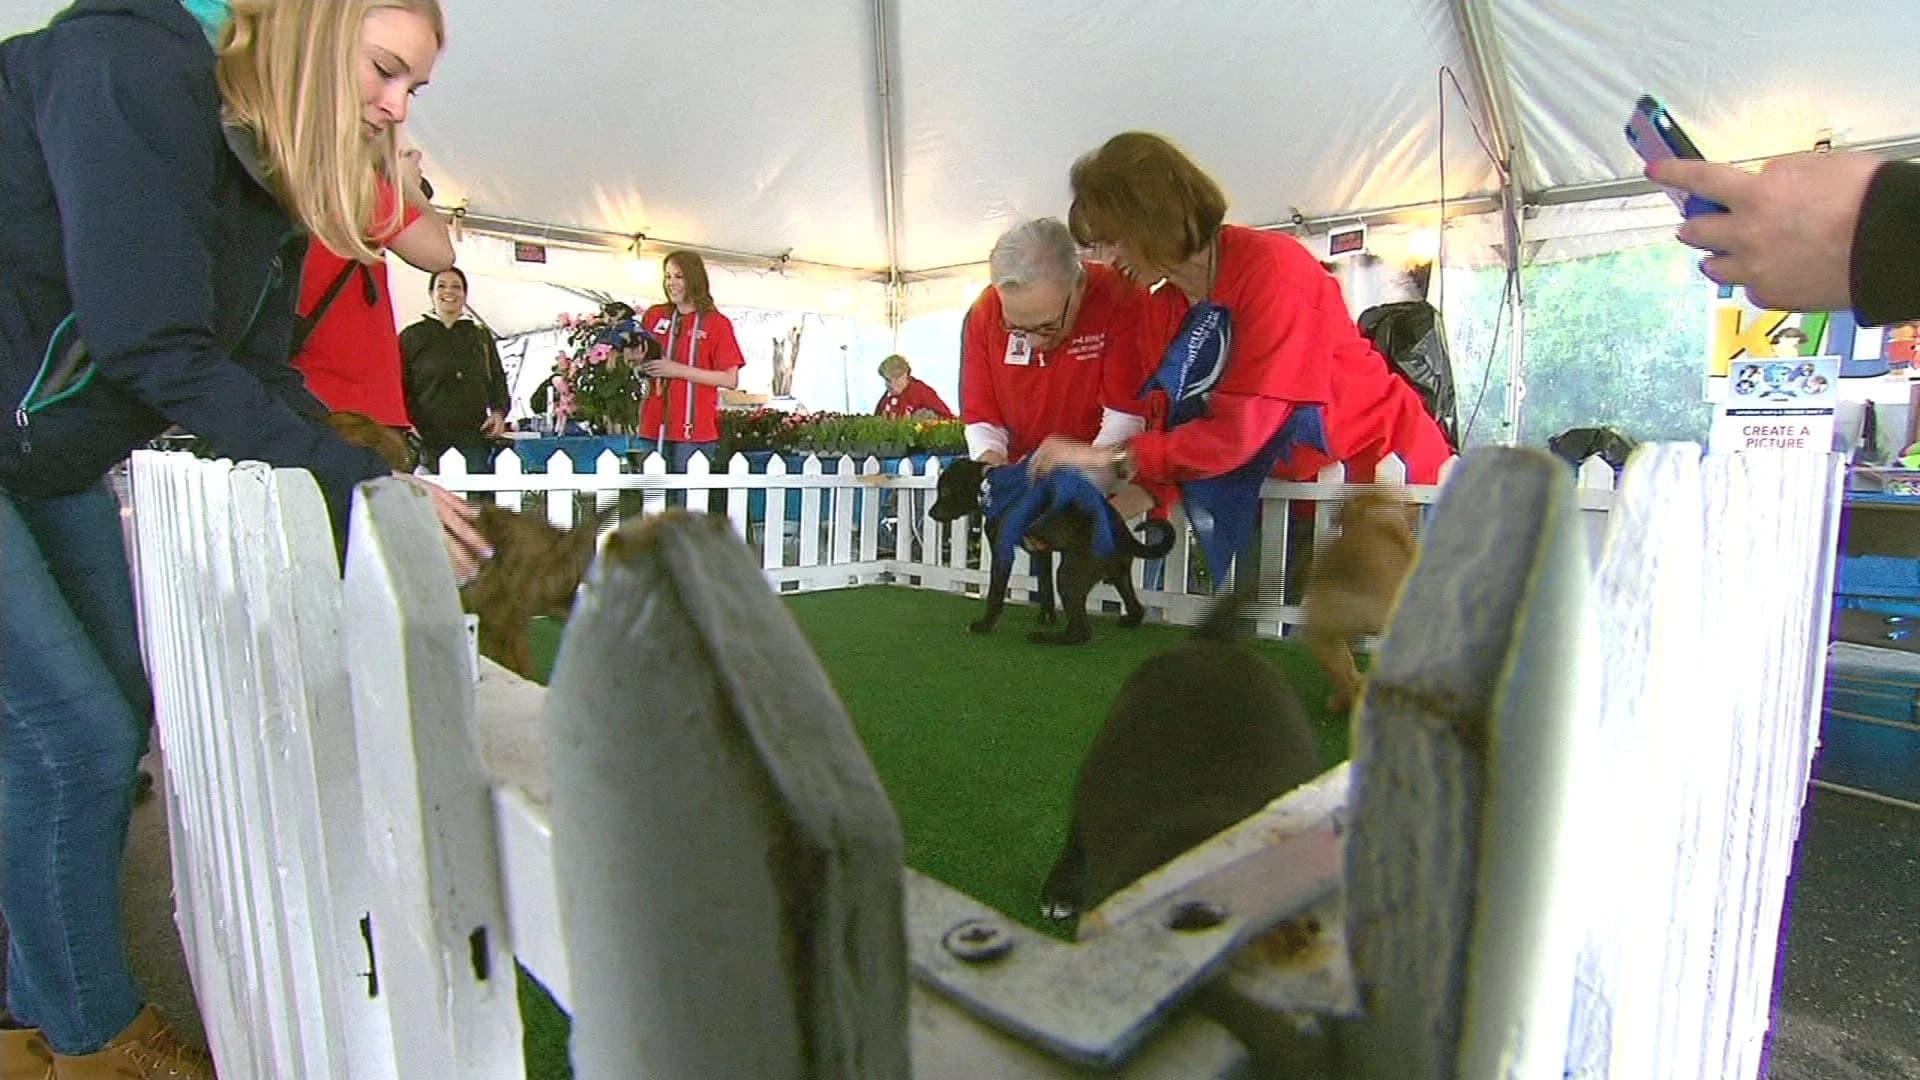 LI residents line up for North Shore Animal League adopt-a-thon